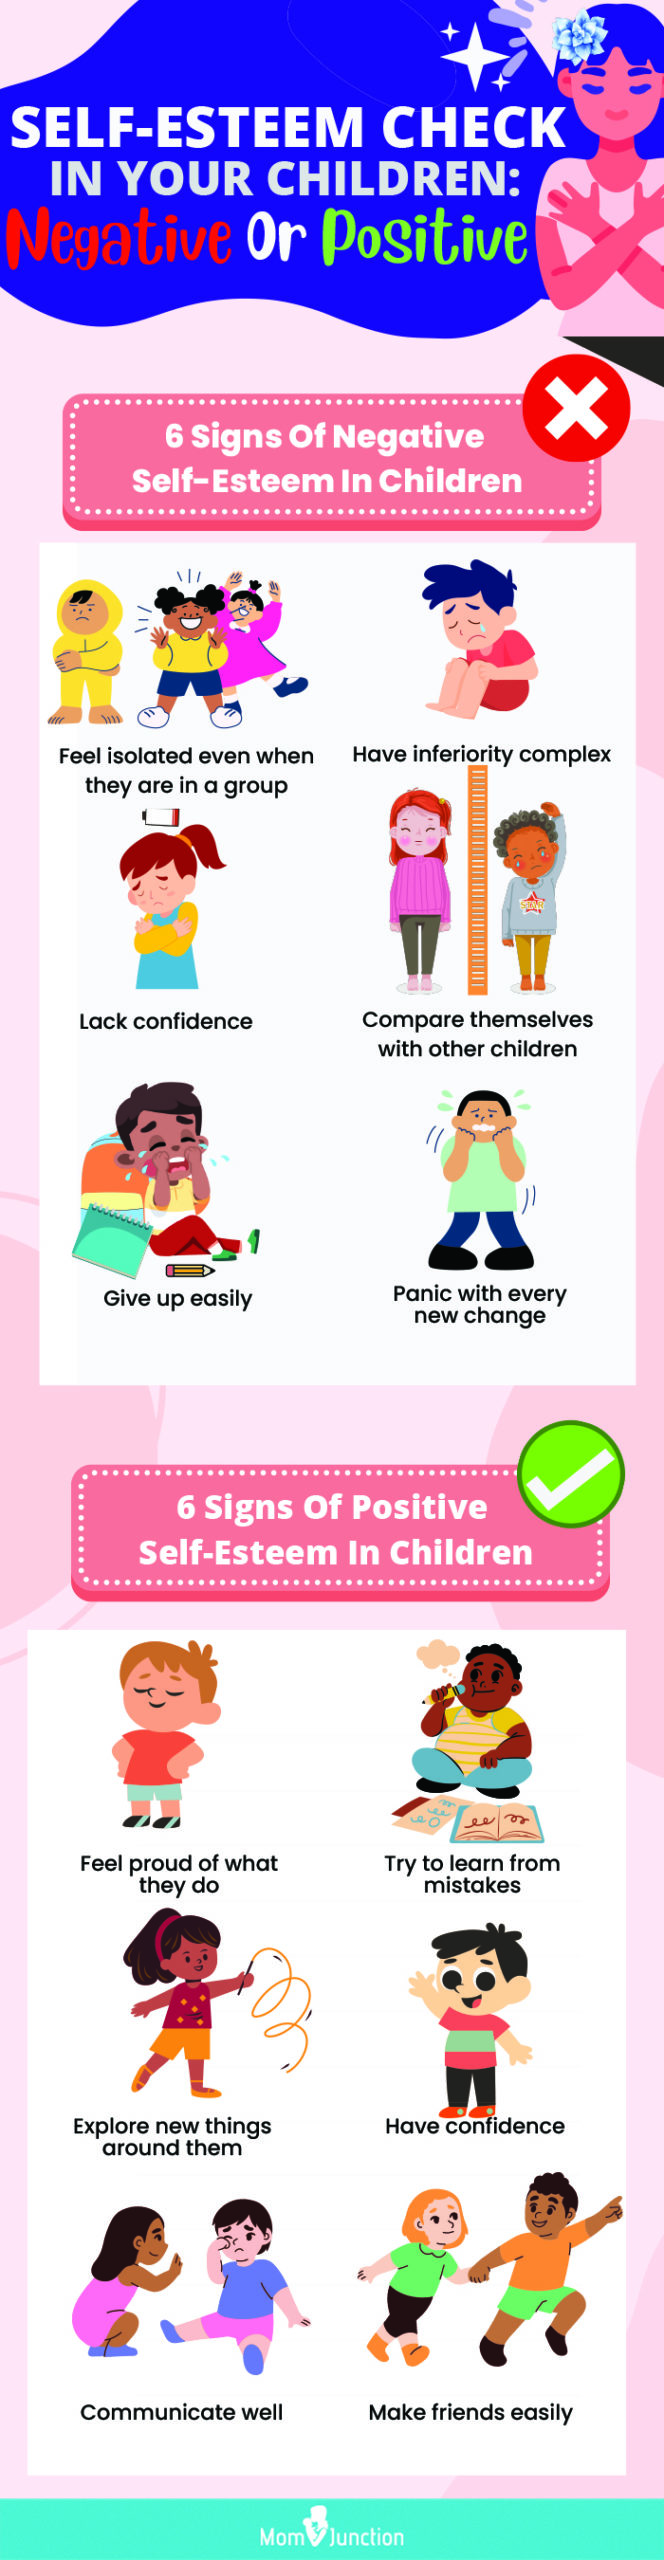 self-esteem check in your children negative or positive [infographic]